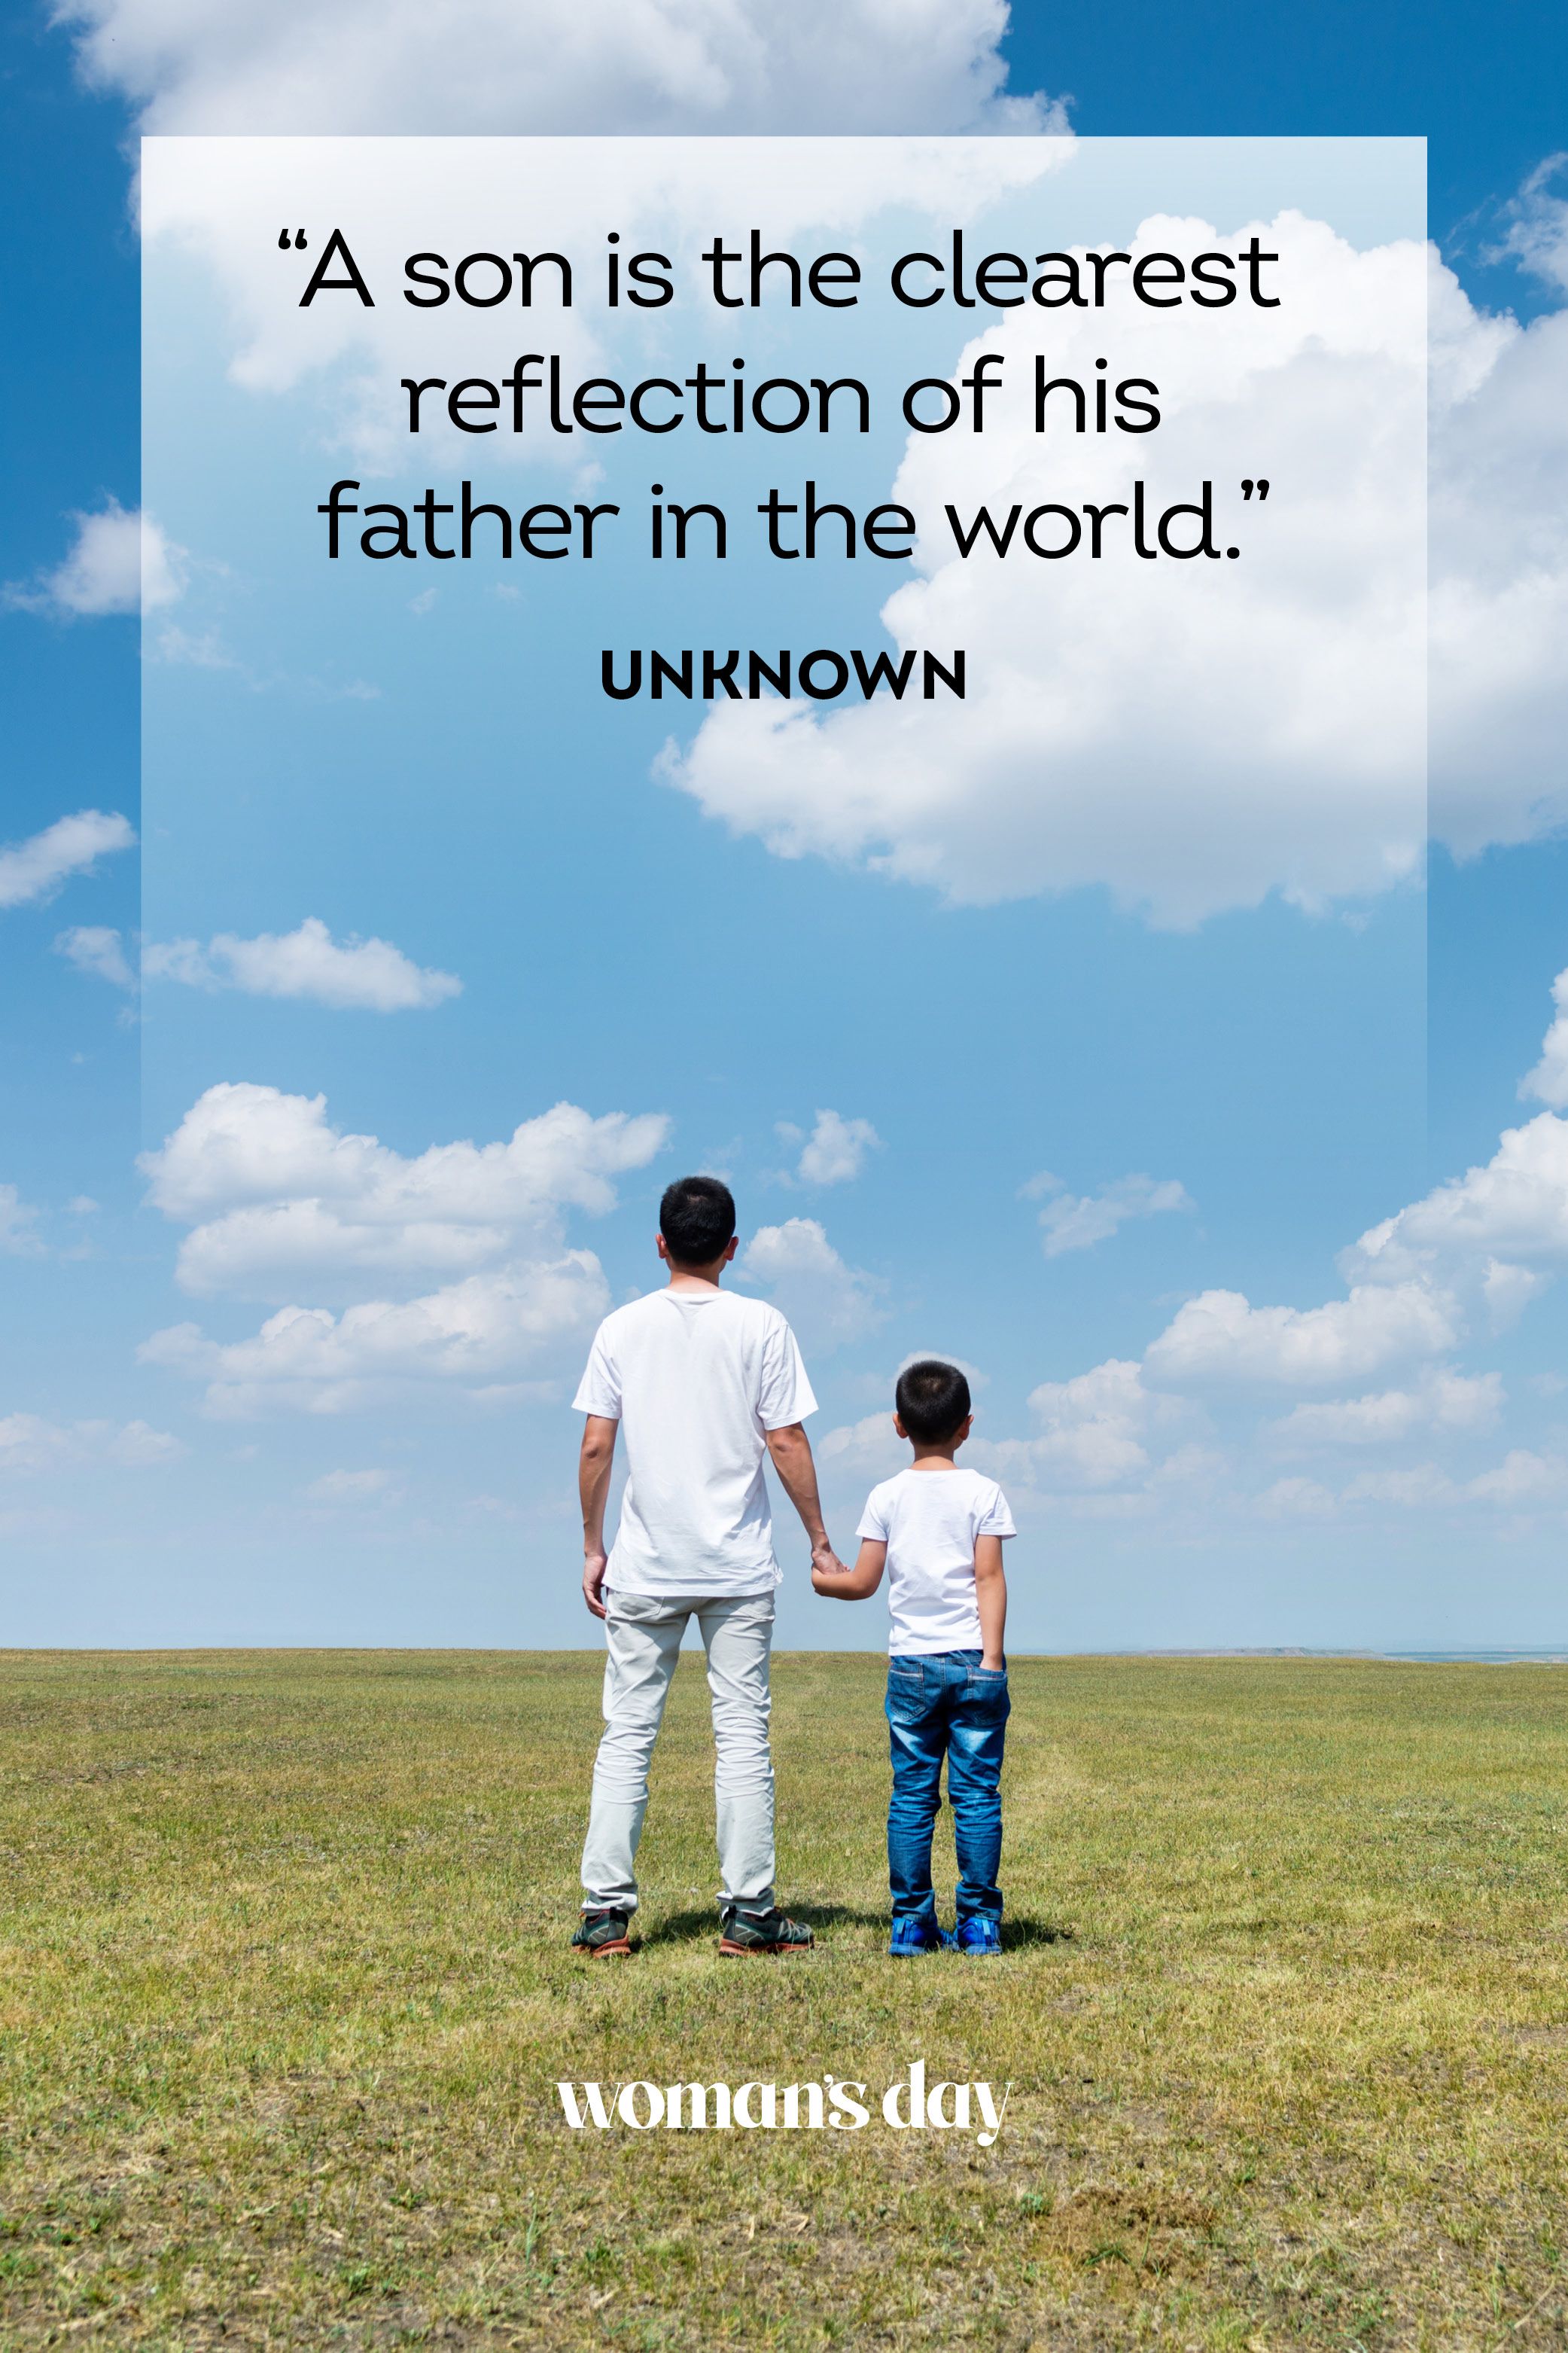 bible quotes about fathers and sons